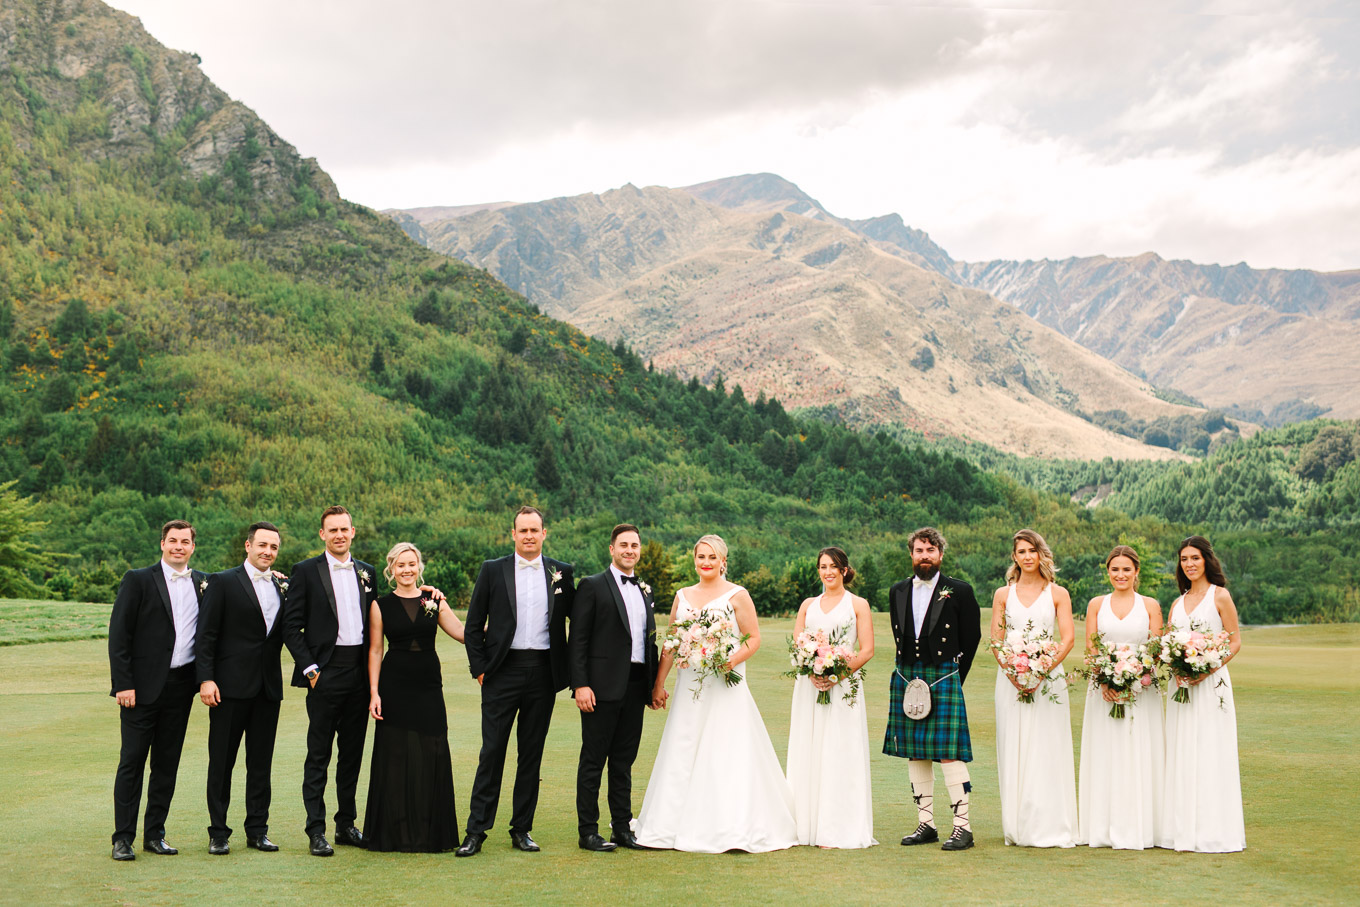 Wedding party with mountain backdrop. Millbrook Resort Queenstown New Zealand wedding by Mary Costa Photography | www.marycostaweddings.com